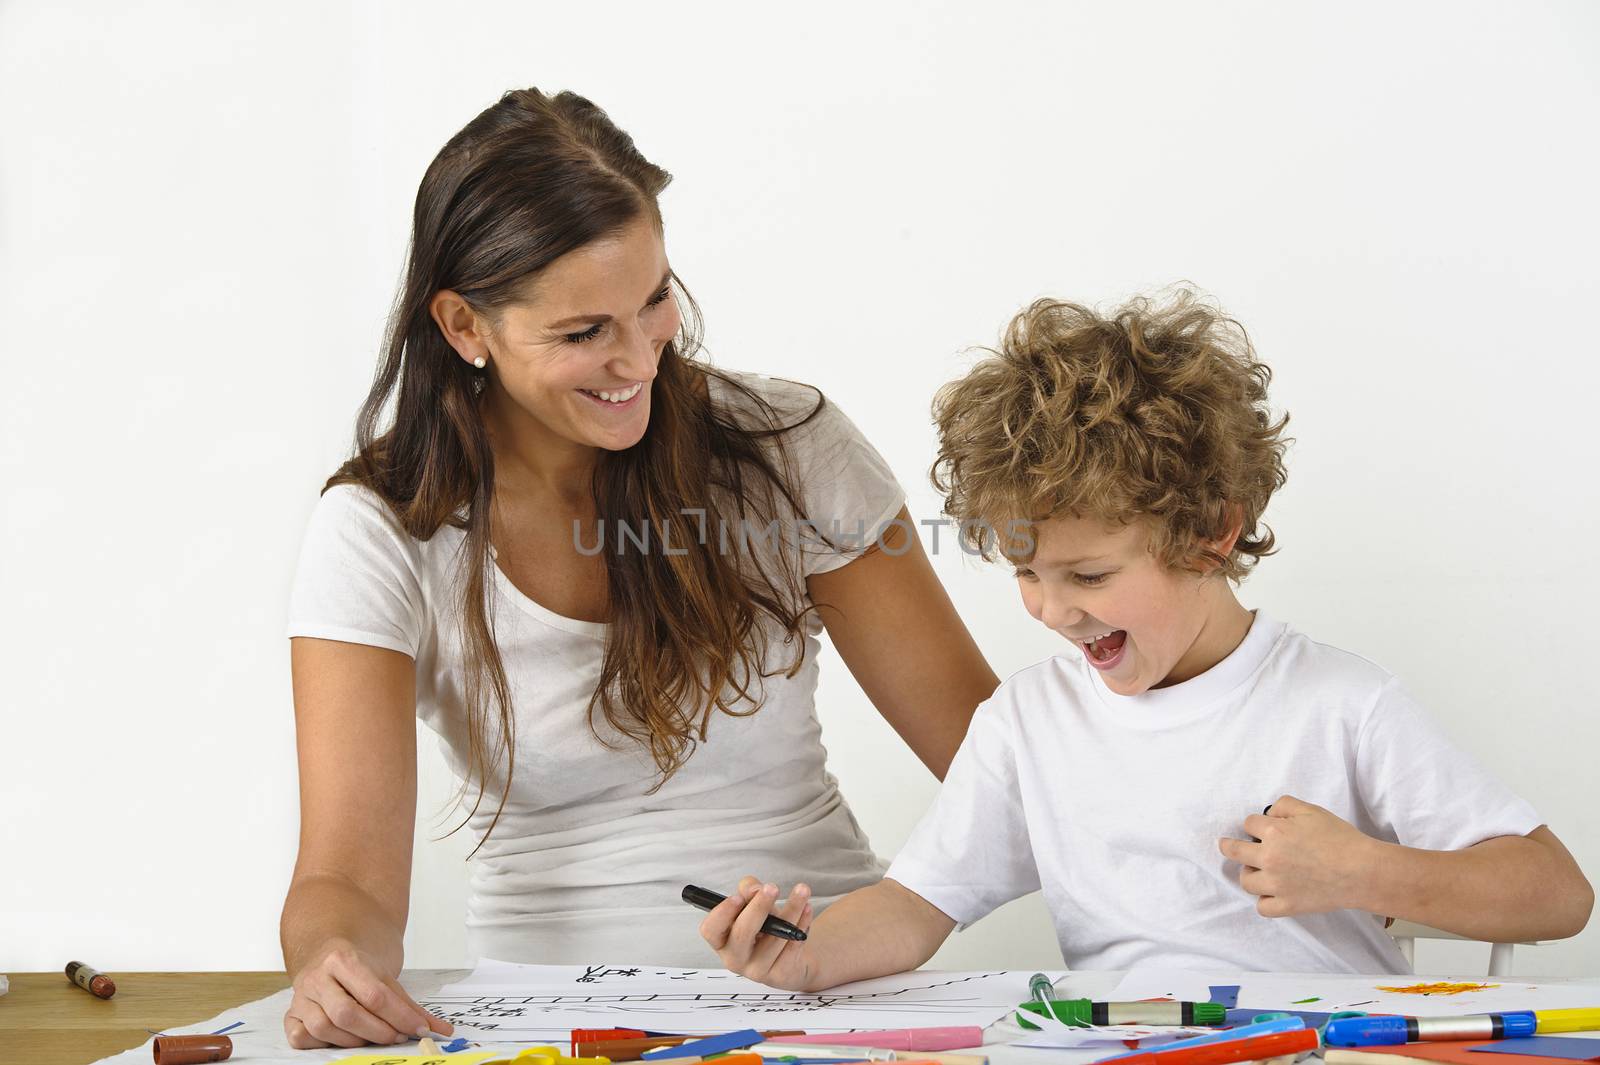 Mother teaches her child how to draw